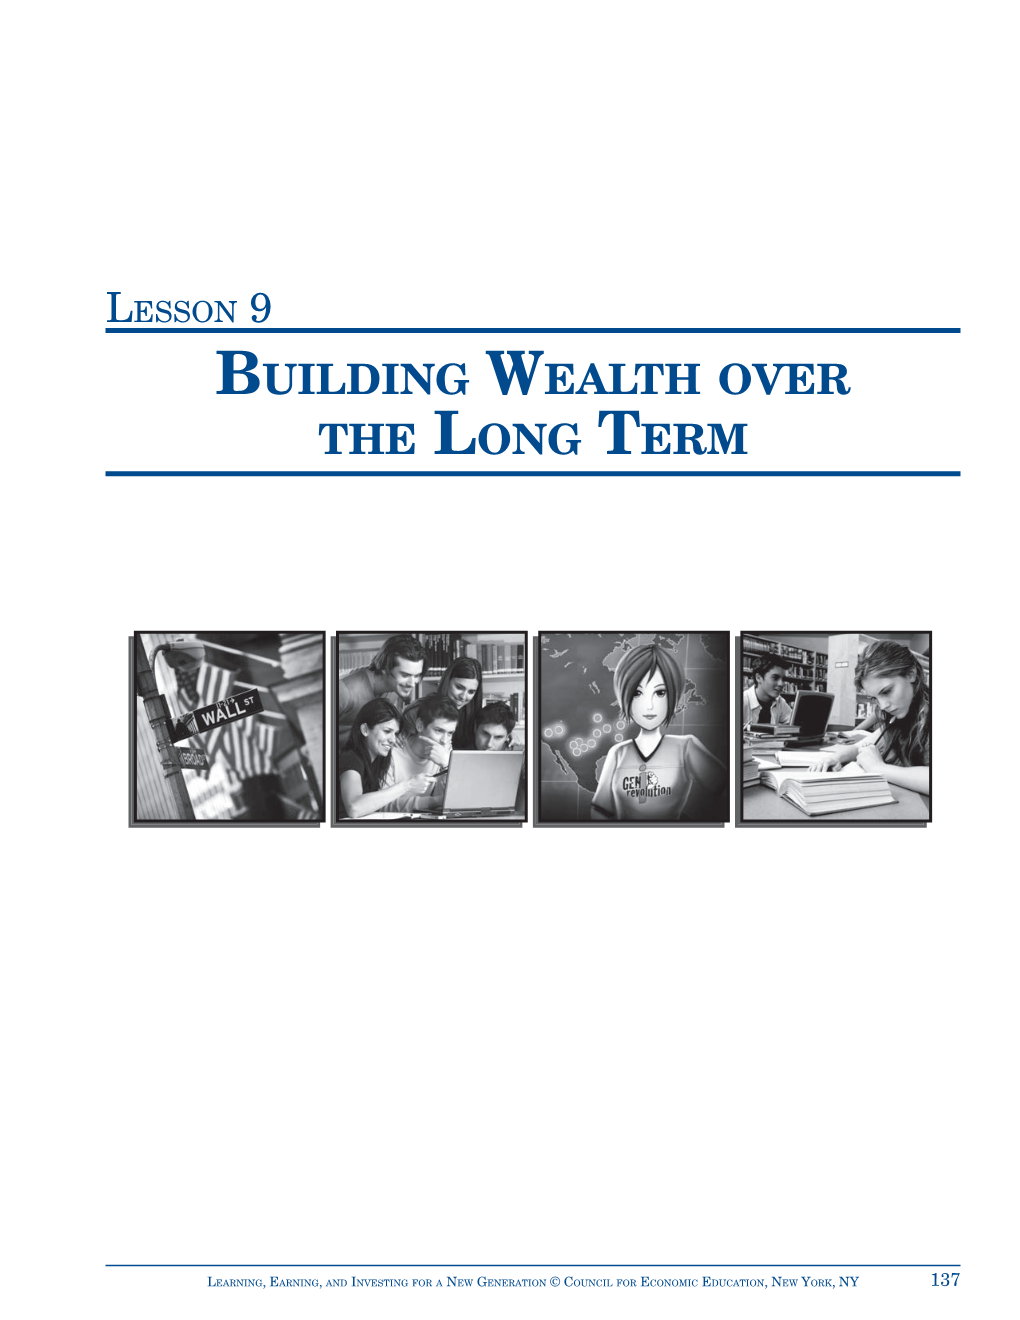 Building Wealth Over the Long Term